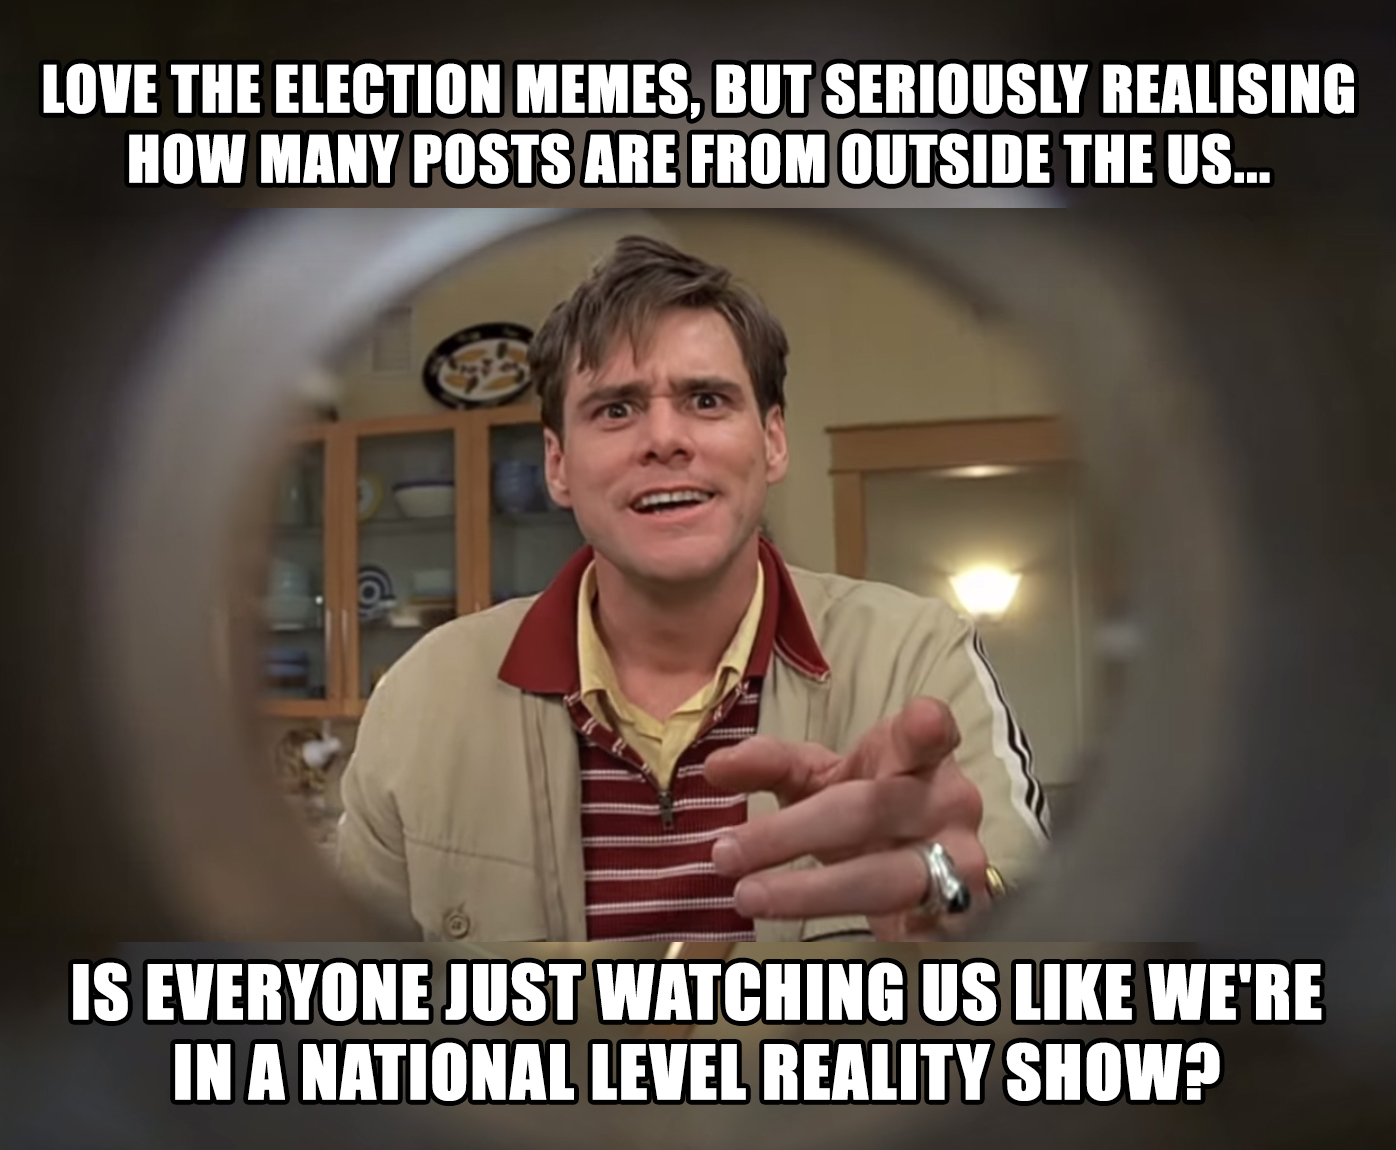 truman show scene - Love The Election Memes, But Seriously Realising How Many Posts Are From Outside The Us... Is Everyone Just Watching Us We'Re In A National Level Reality Show?